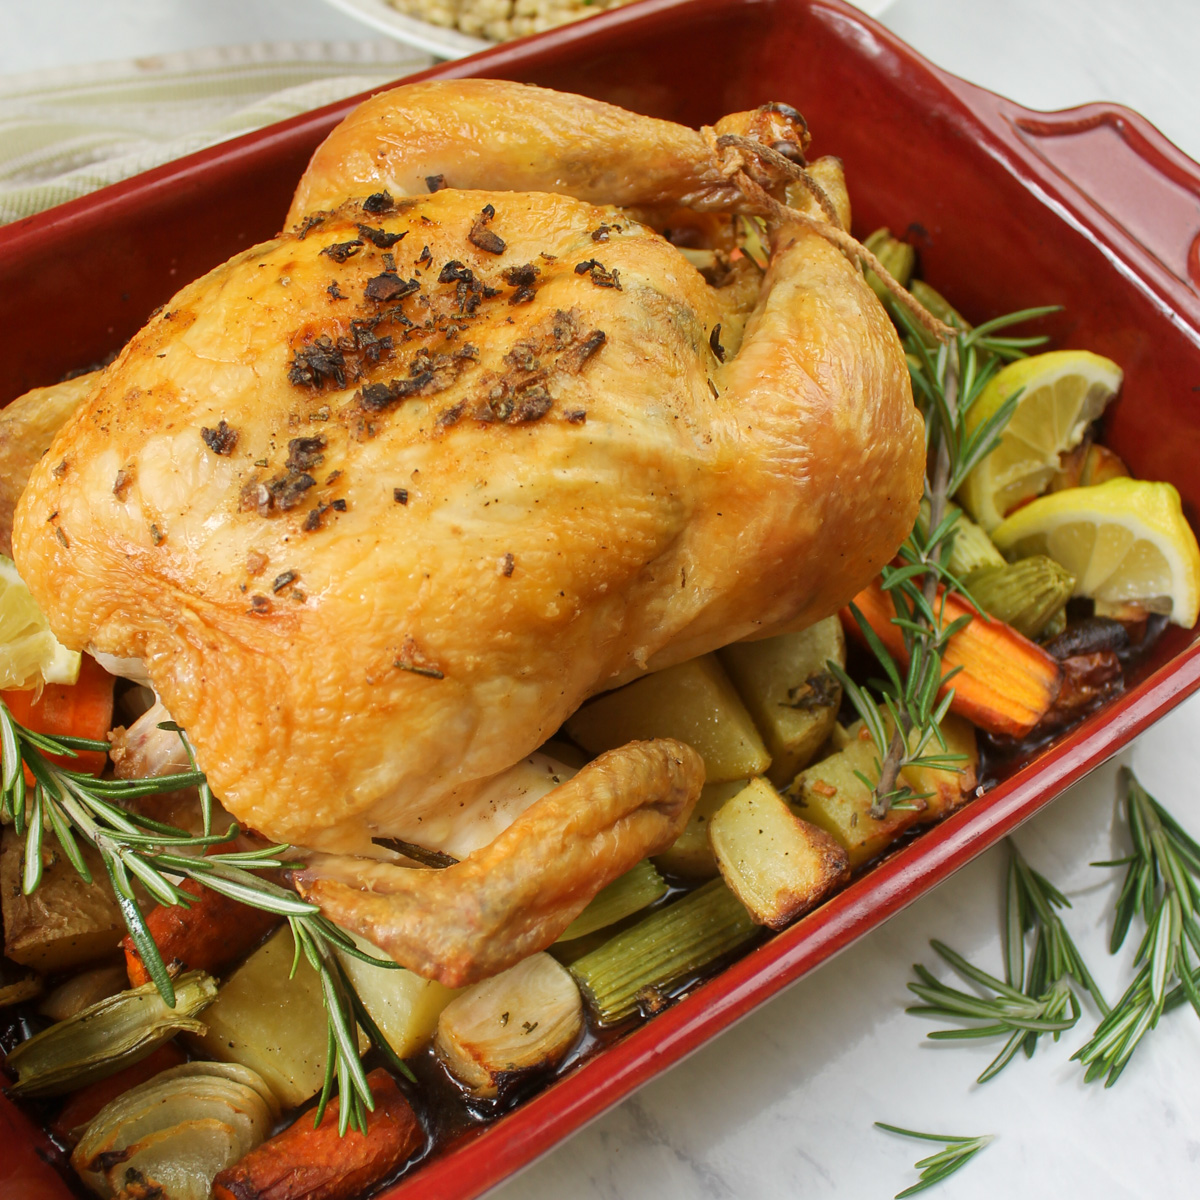 Instant Pot Garlic Herb Rotisserie Chicken - The Roasted Root